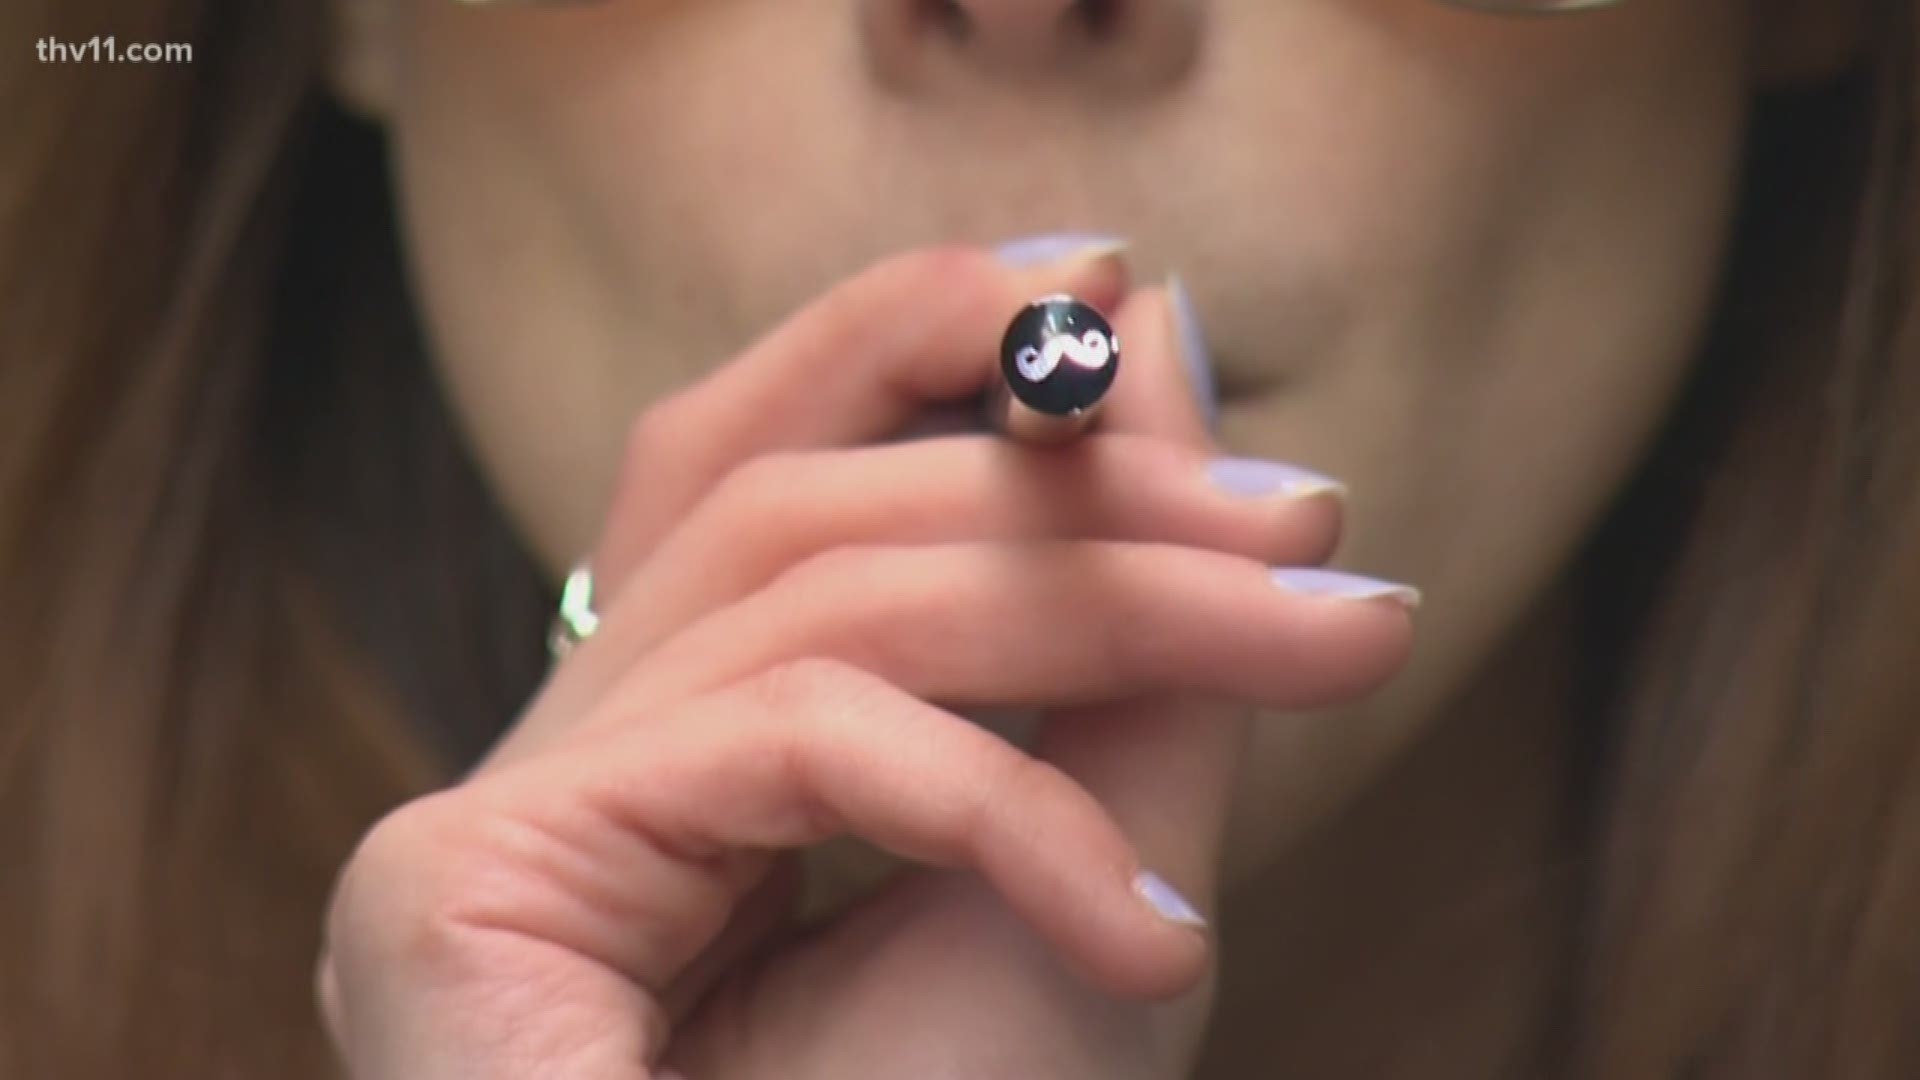 The numbers have health and safety officials alarmed, especially as vaping swells among teens and young people.